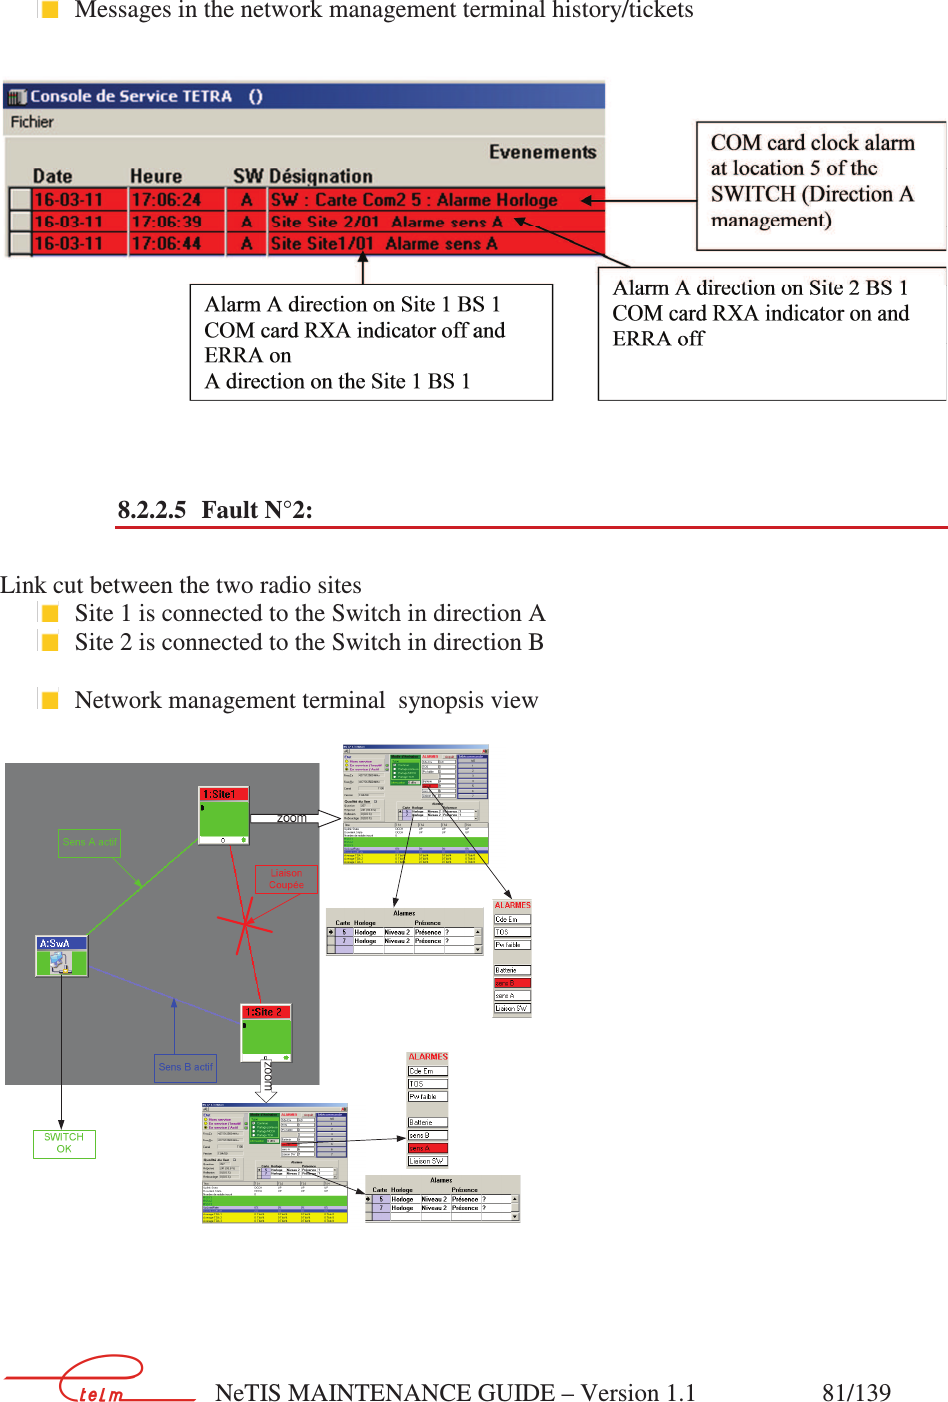        NeTIS MAINTENANCE GUIDE – Version 1.1                    81/139      Messages in the network management terminal history/tickets      8.2.2.5 Fault N°2:  Link cut between the two radio sites    Site 1 is connected to the Switch in direction A  Site 2 is connected to the Switch in direction B   Network management terminal  synopsis view     